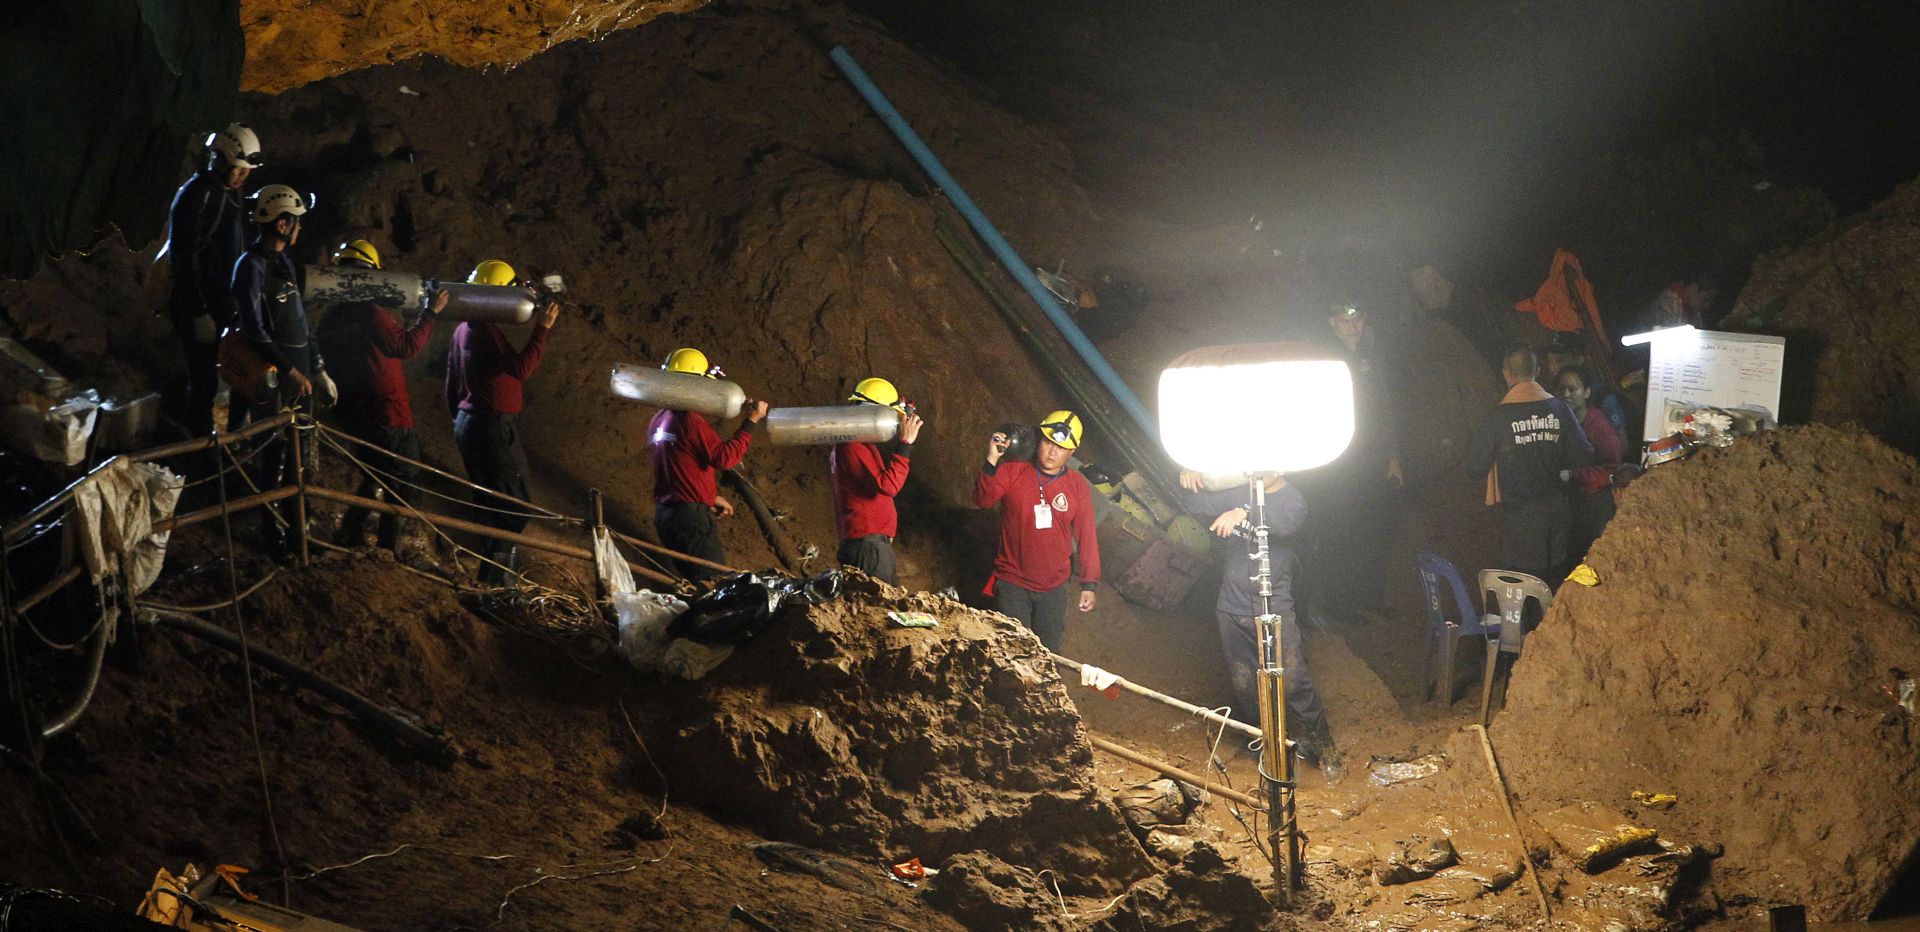 epa06853964 Thai officials carry oxygen tanks through a cave complex during a rescue operation for a missing football team at the Tham Luang cave in Tham Luang Khun Nam Nang Noon Forest Park in Chiang Rai province, Thailand, 30 June 2018. Rescuers are attempting to pump water out of a cave complex in an effort to rescue 12 members of a youth soccer team that are believed to have been trapped in the flooded cave complex since 23 June.  EPA/PONGMANAT TASIRI